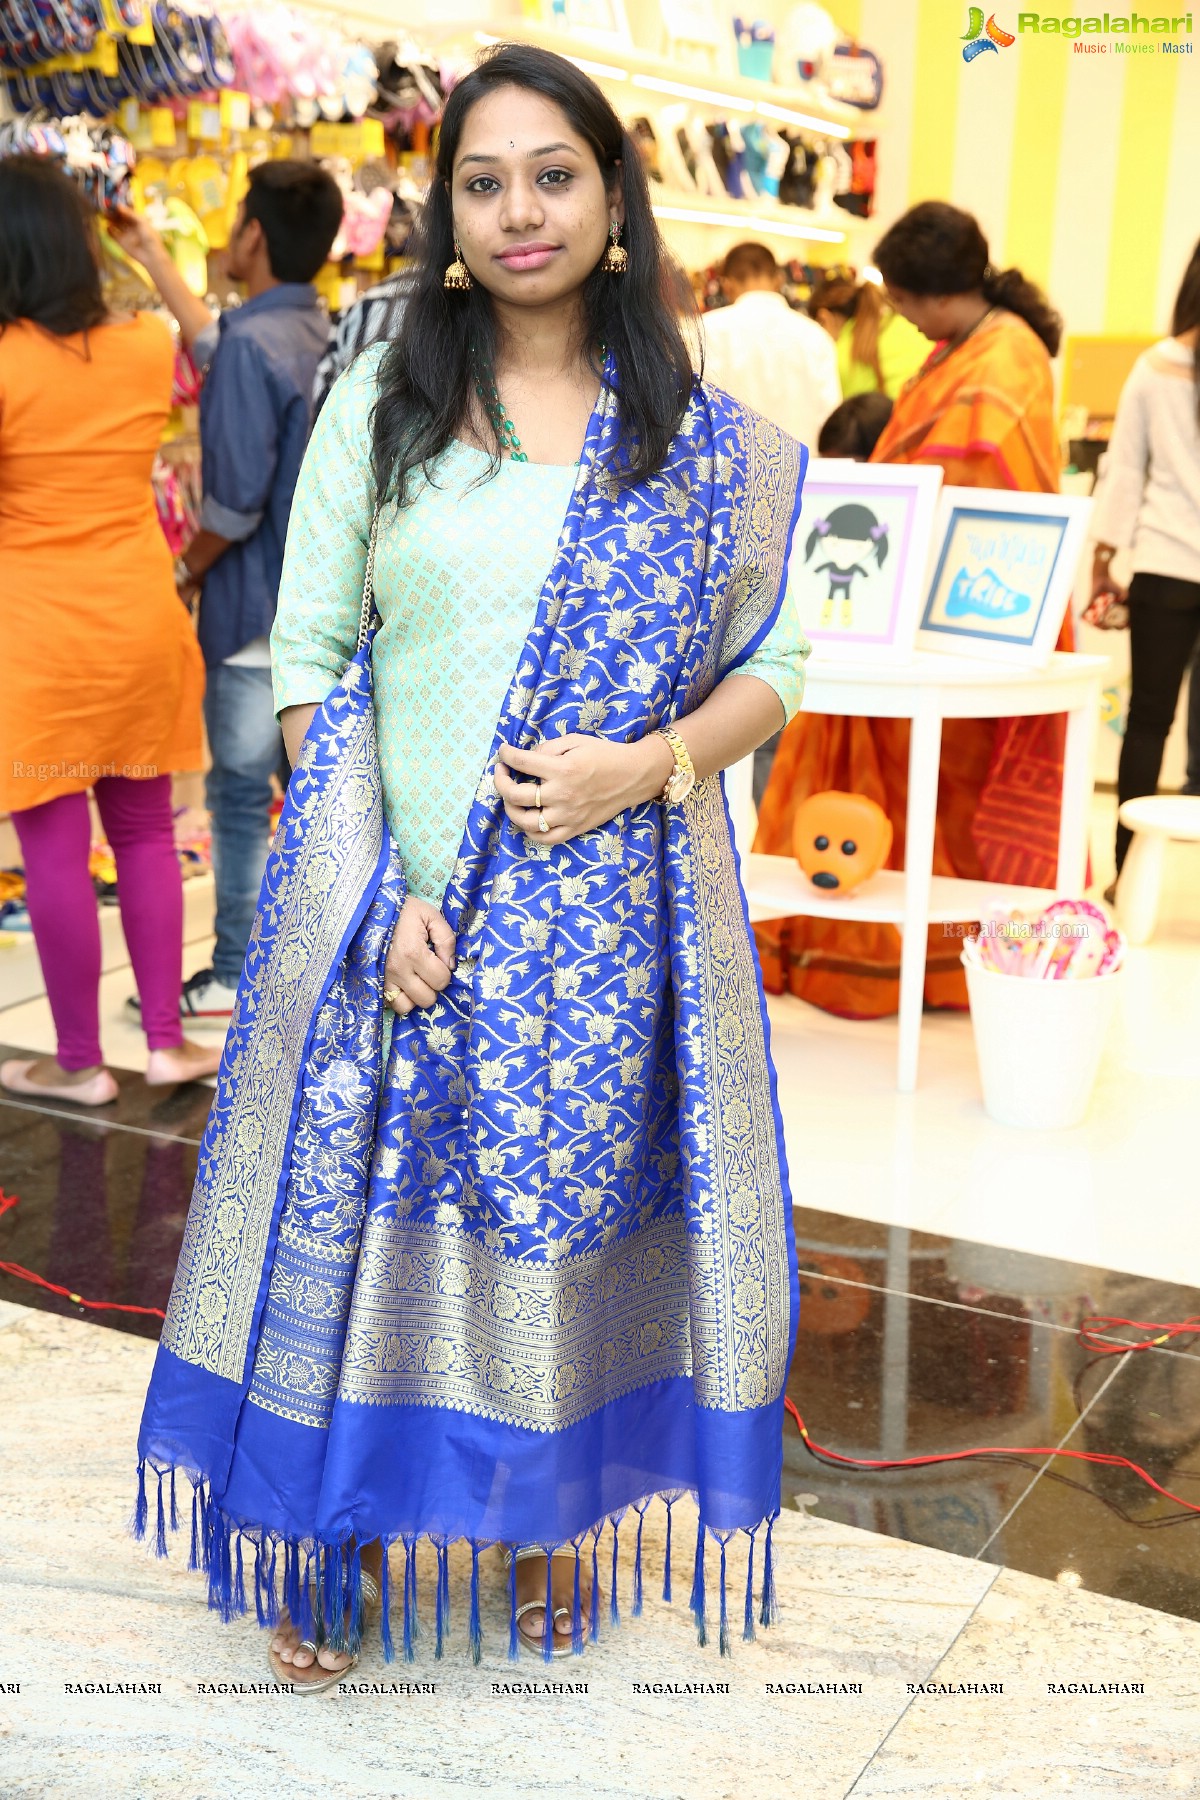 Dilly & Dolly Kids Footwear Launch at Sarath City Capital Mall